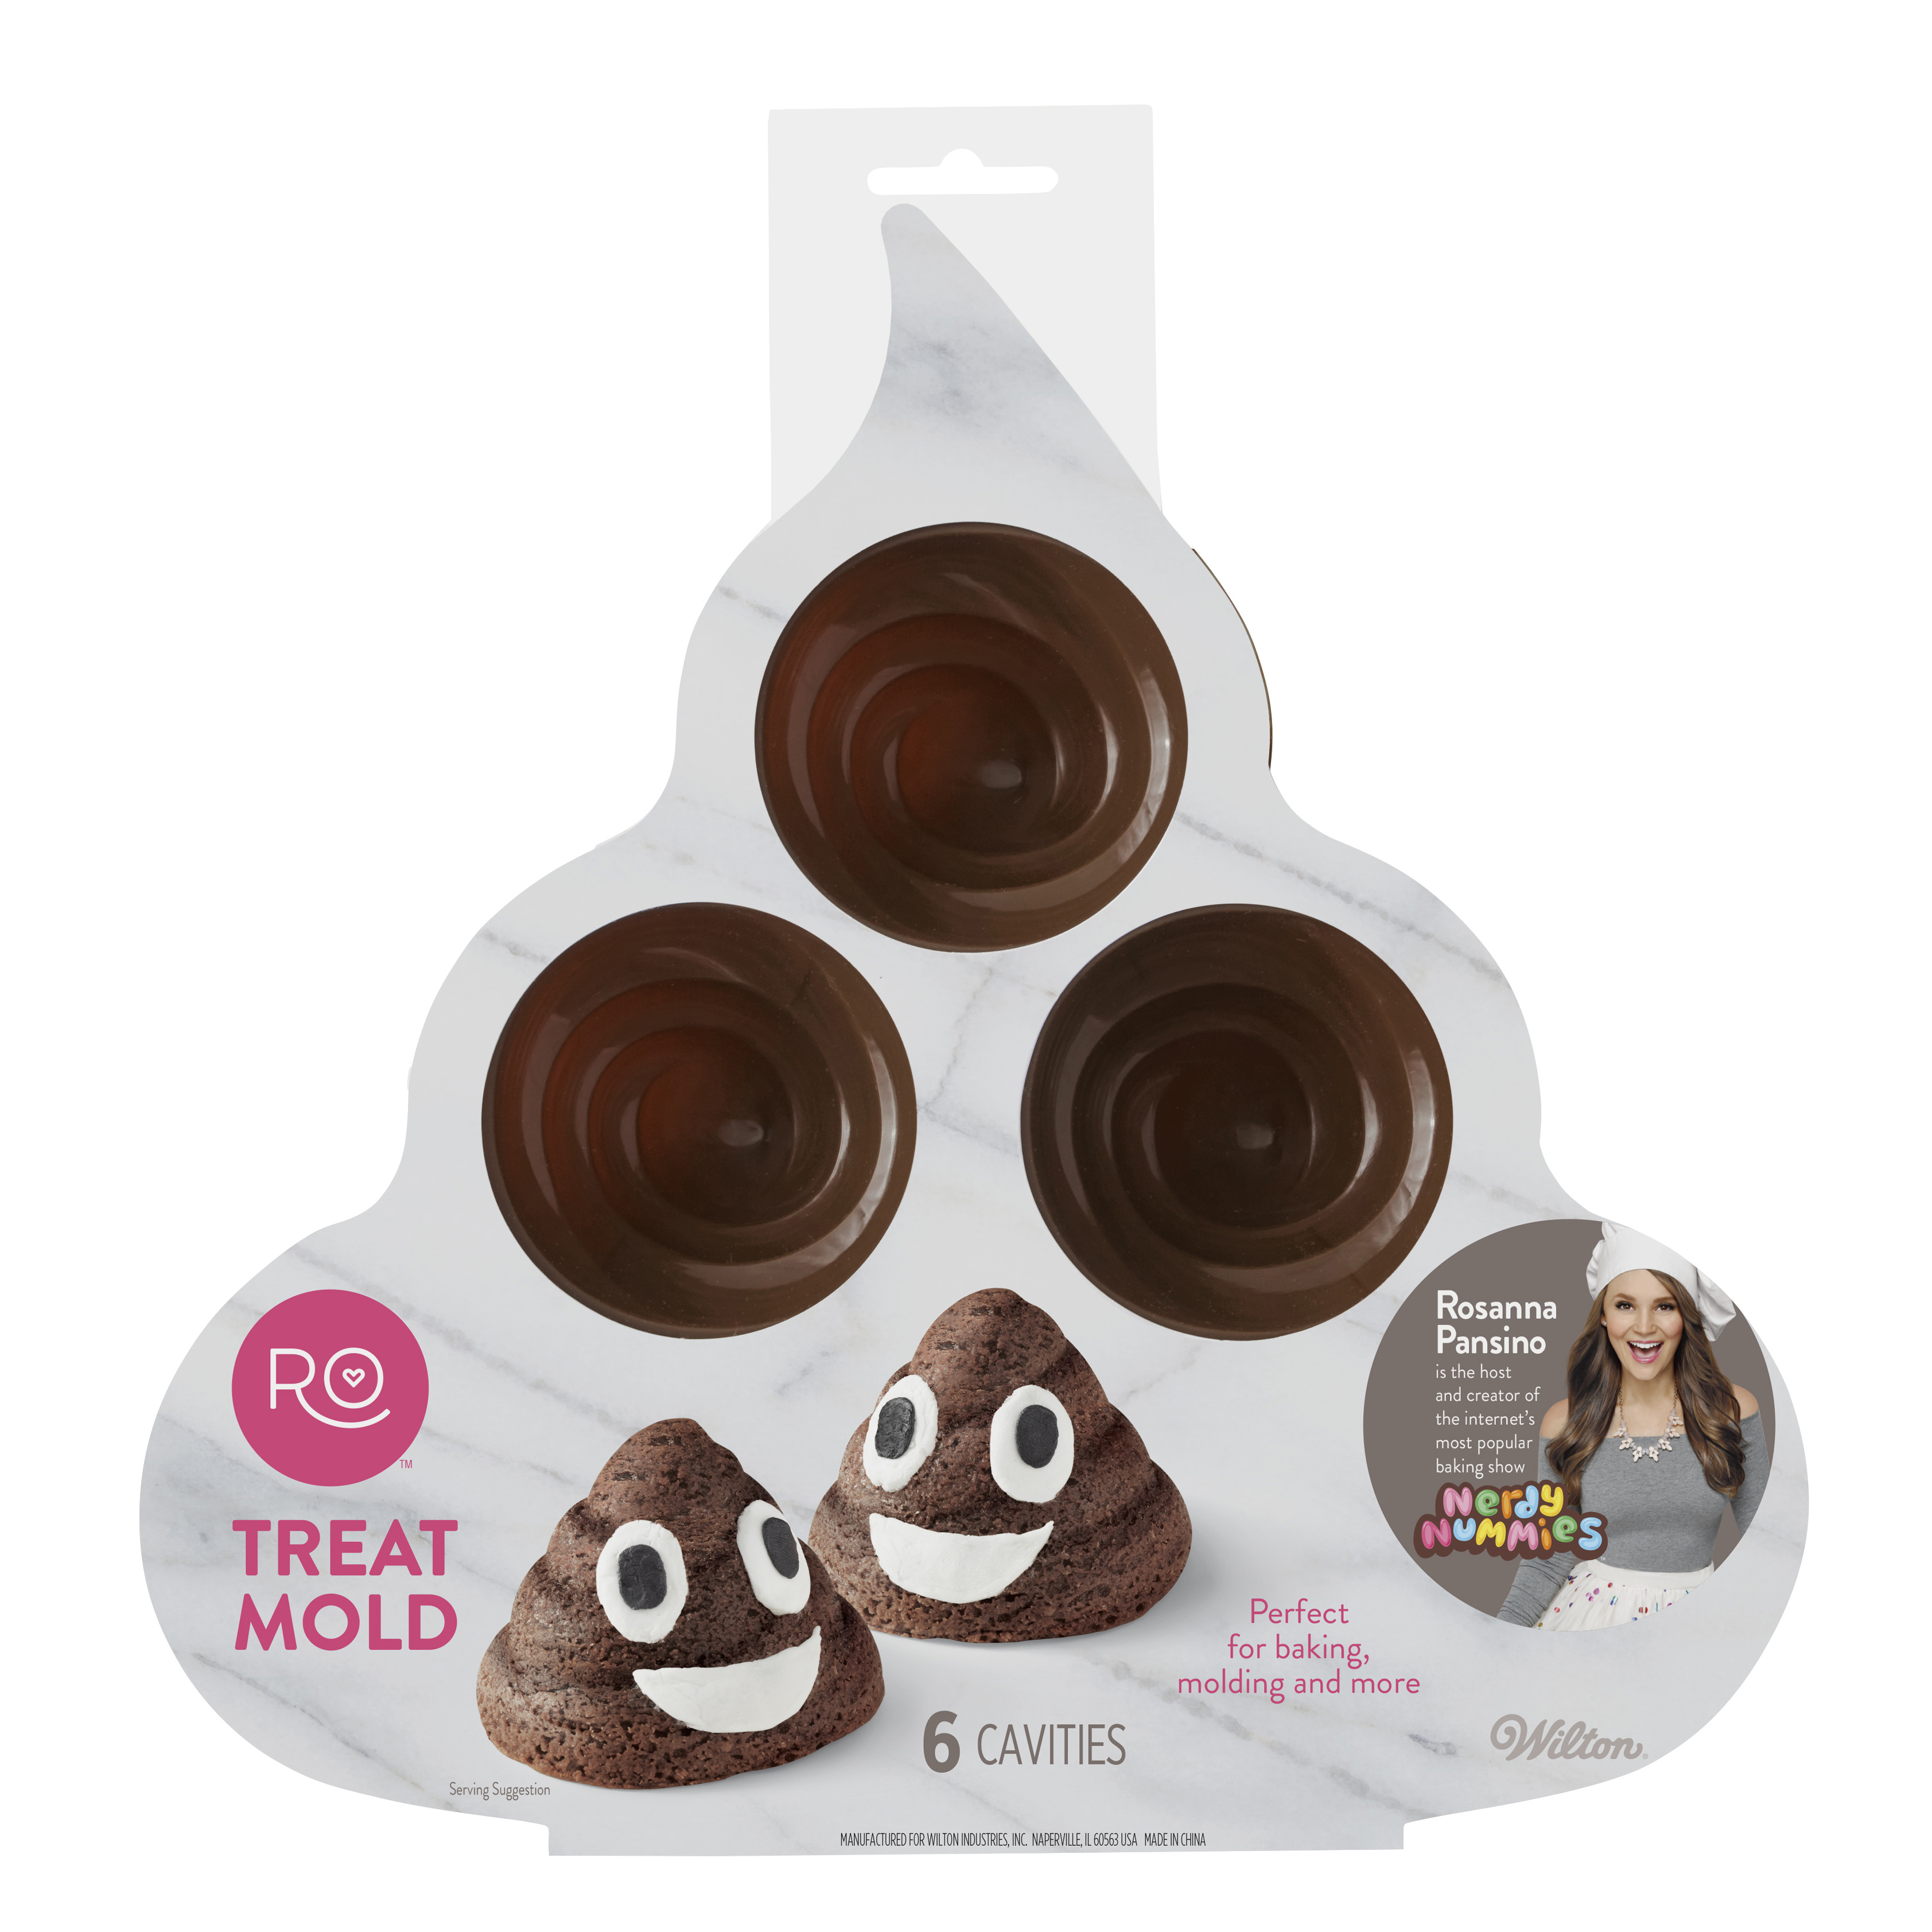 ROSANNA PANSINO by Wilton Silicone Poop Emoji Cake Pan - 6-Cavity Silicone Candy Mold - image 3 of 12